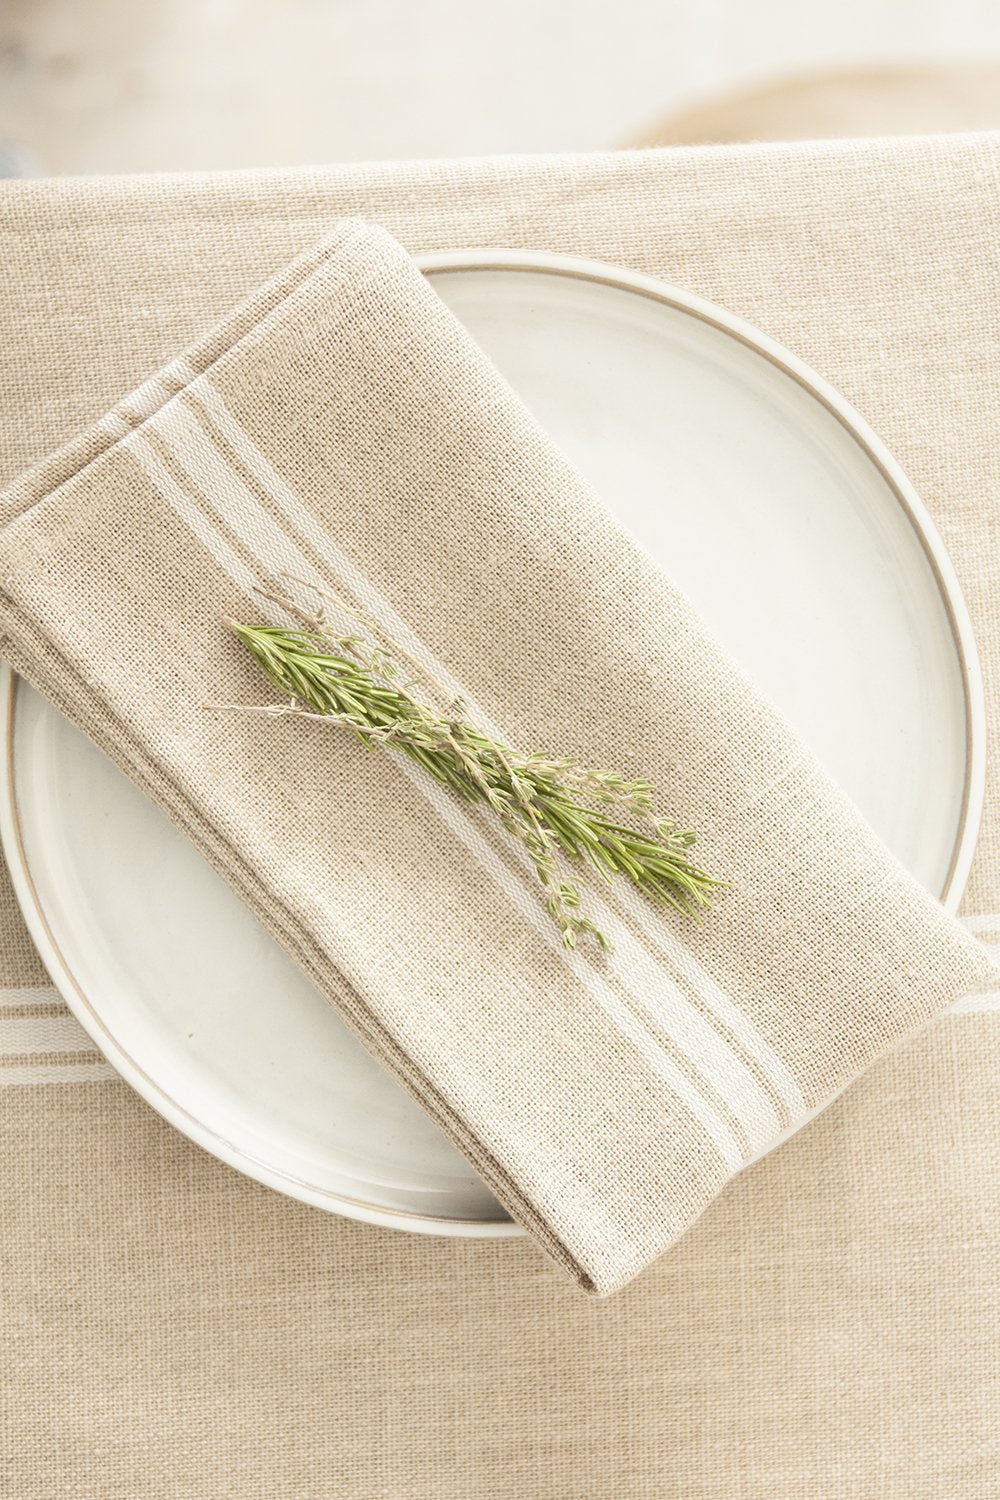 Thieffry White Monogramme Linen Napkin (21" x 20") - Set of 2 - French Dry Goods